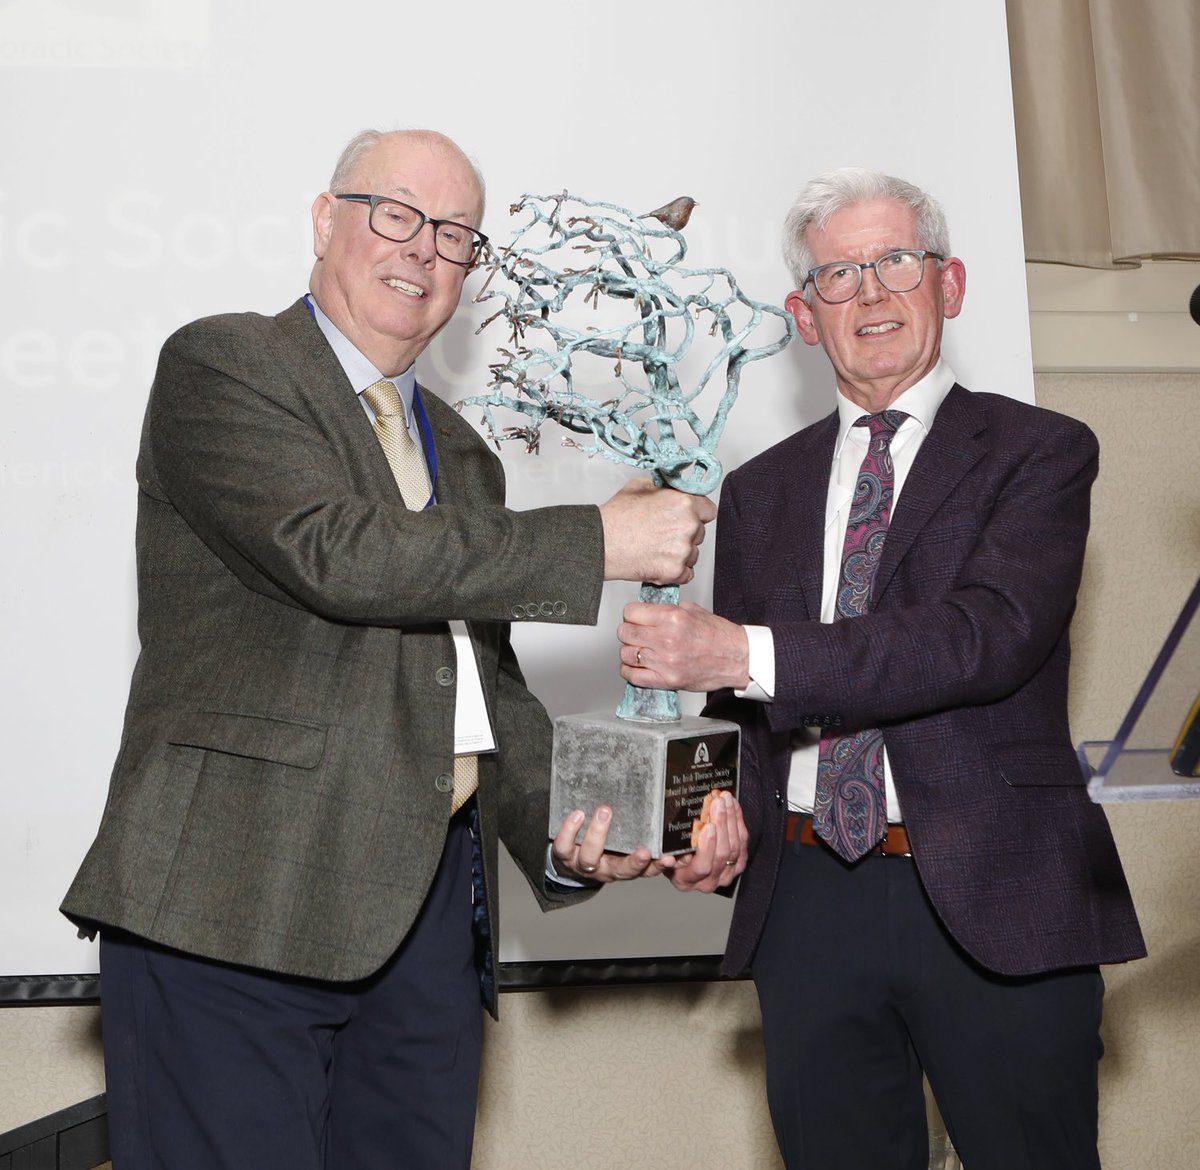 A highlight of the ITS Annual Scientific Meeting 2023 was the presentation of the Award for Outstanding Contribution to Respiratory Medicine to Professor Tim McDonnell. Presented on behalf of the ITS by friend and colleague Prof Charlie Gallagher.